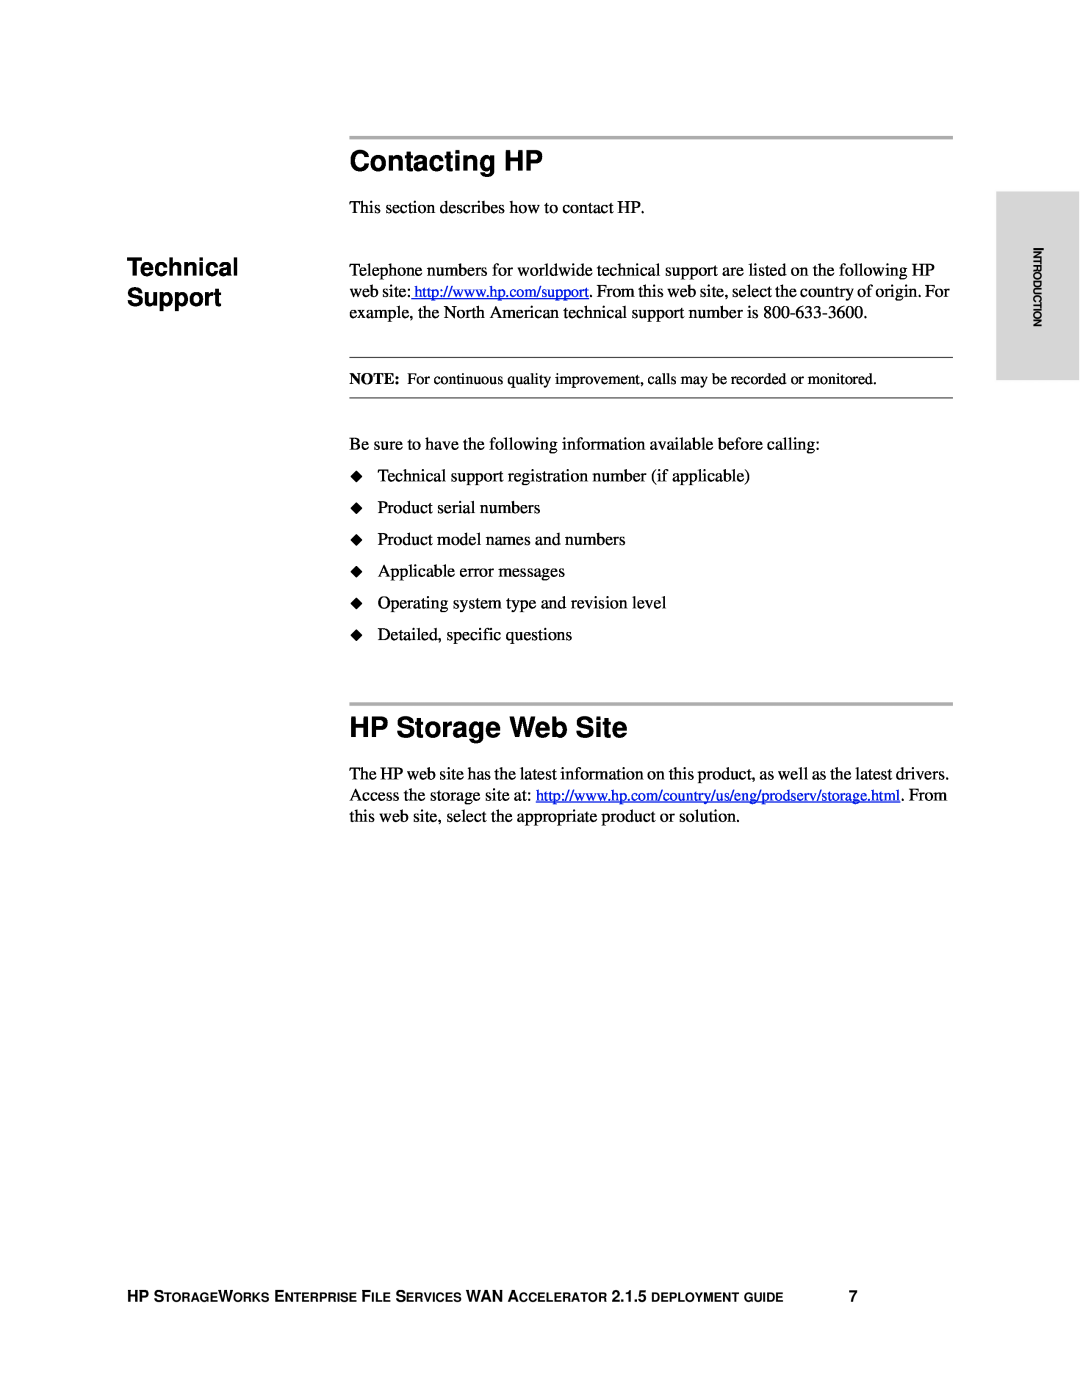 HP Enterprise File Services WAN Accelerator manual Contacting HP, HP Storage Web Site, Technical Support 